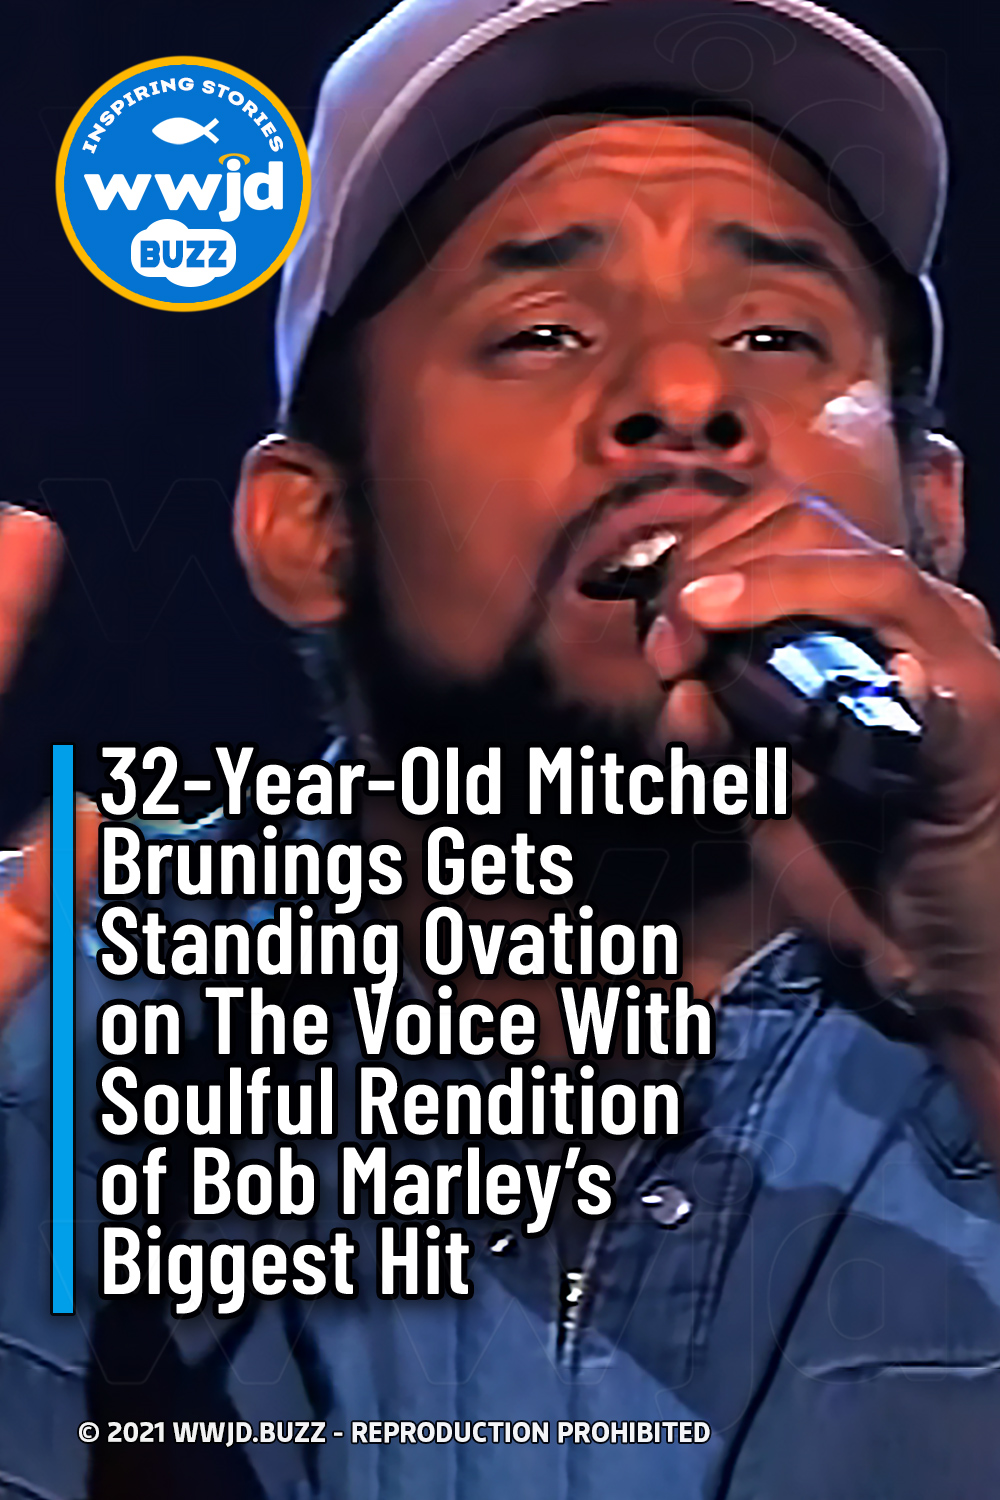 32-Year-Old Mitchell Brunings Gets Standing Ovation on The Voice With Soulful Rendition of Bob Marley’s Biggest Hit